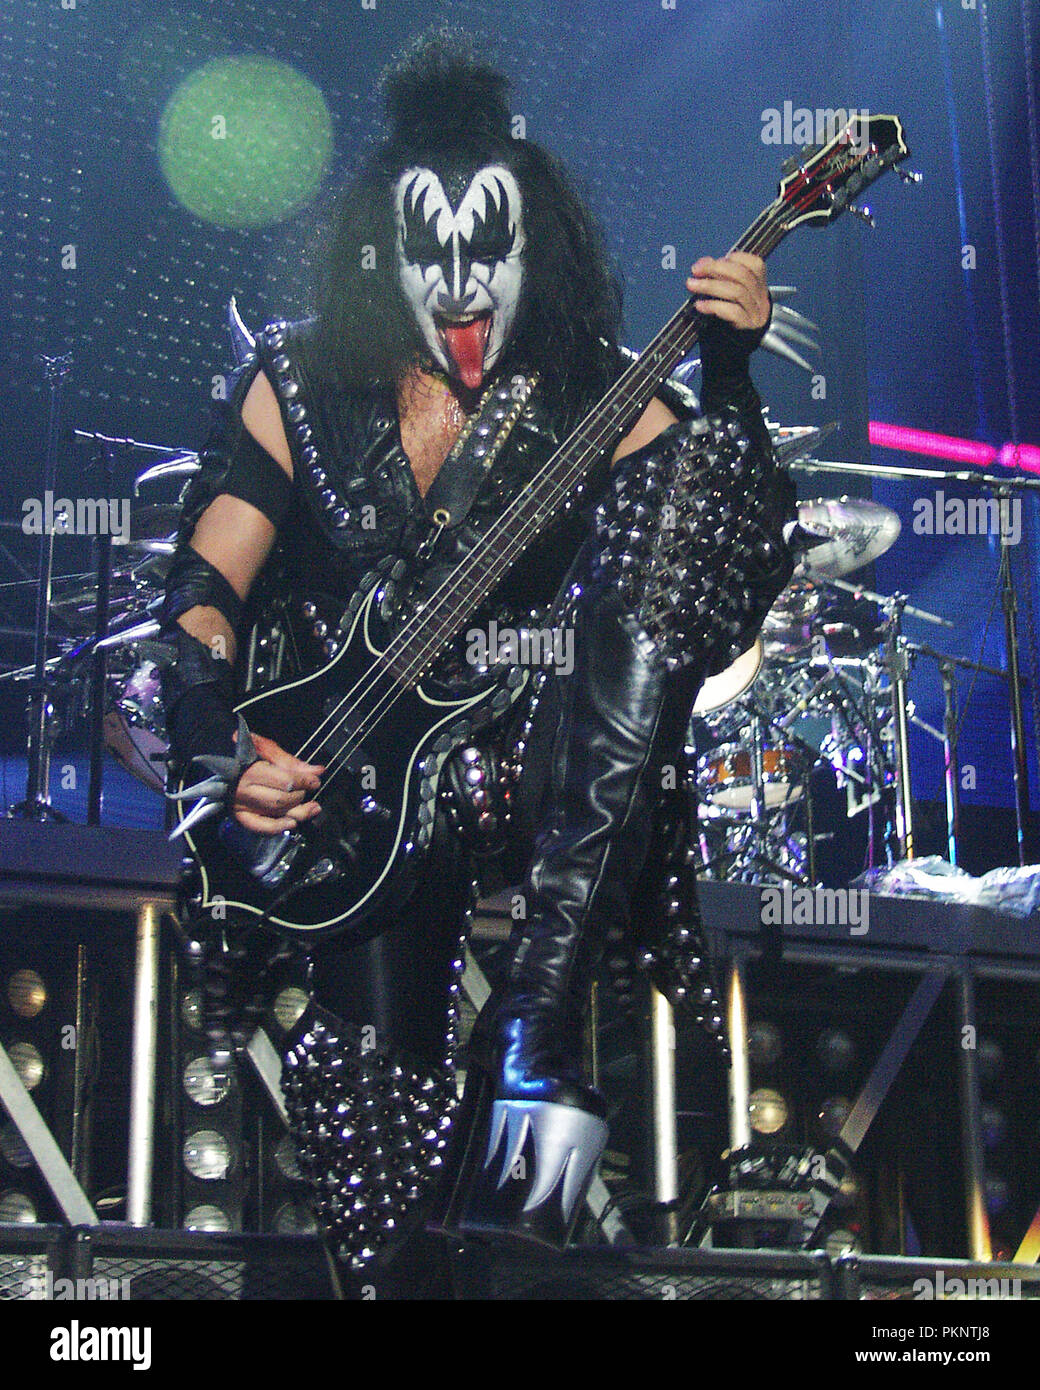 Gene Simmons of KISS performs at Thompson-Boling Arena in Knoxville, Tennessee on December 10, 2003. CREDIT: Chris McKay / MediaPunch Stock Photo